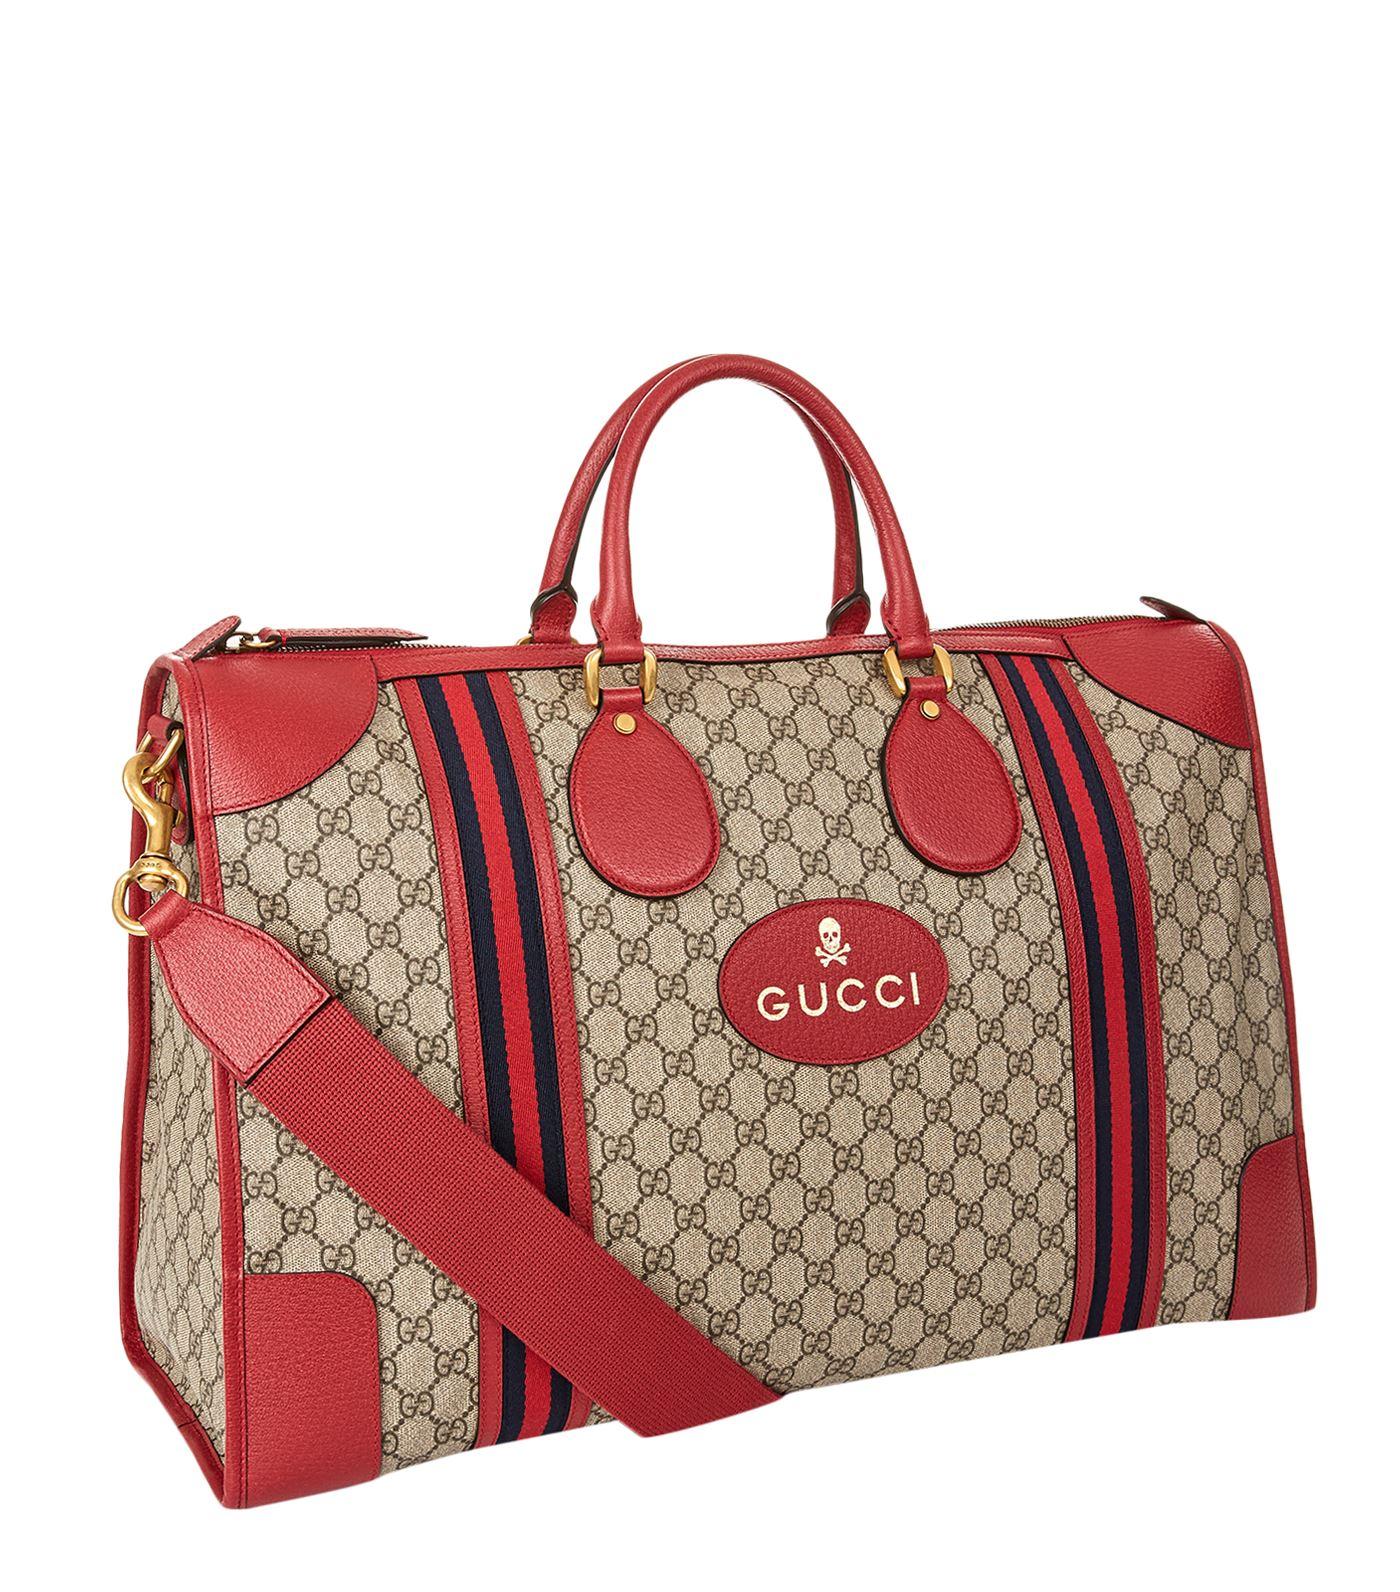 Gucci Leather Large Soft Gg Supreme Duffle Bag in Red for Men - Lyst